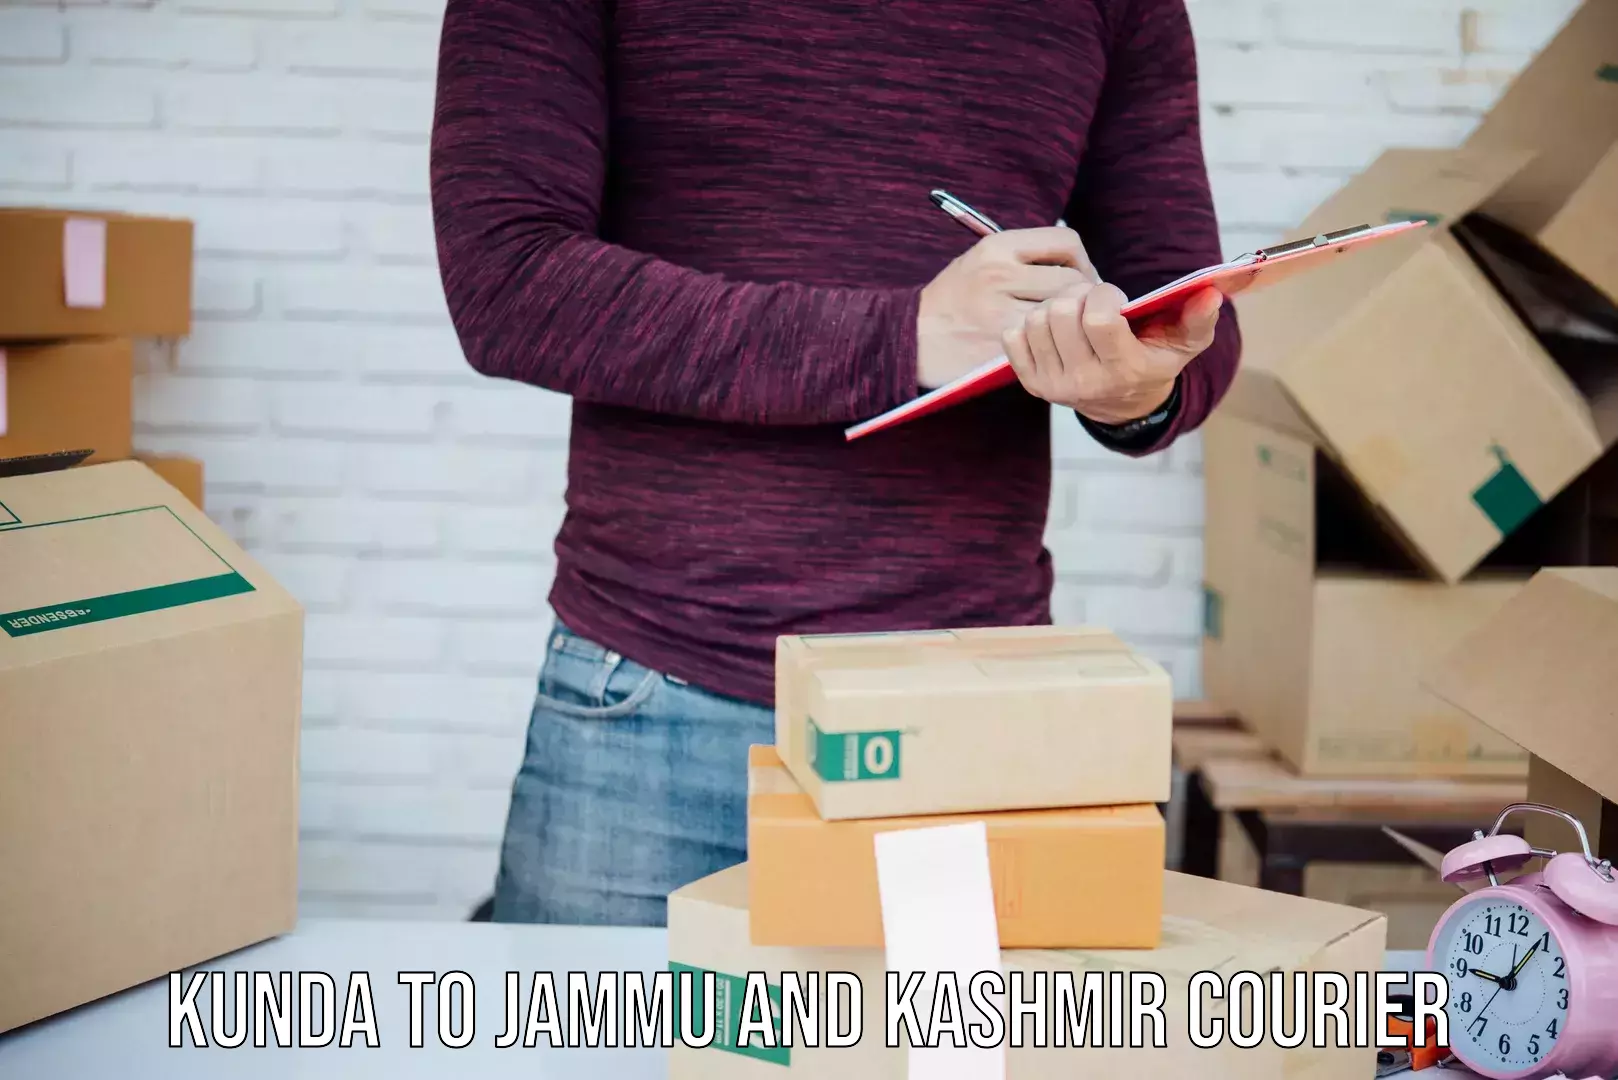 Next-day delivery options Kunda to Jammu and Kashmir